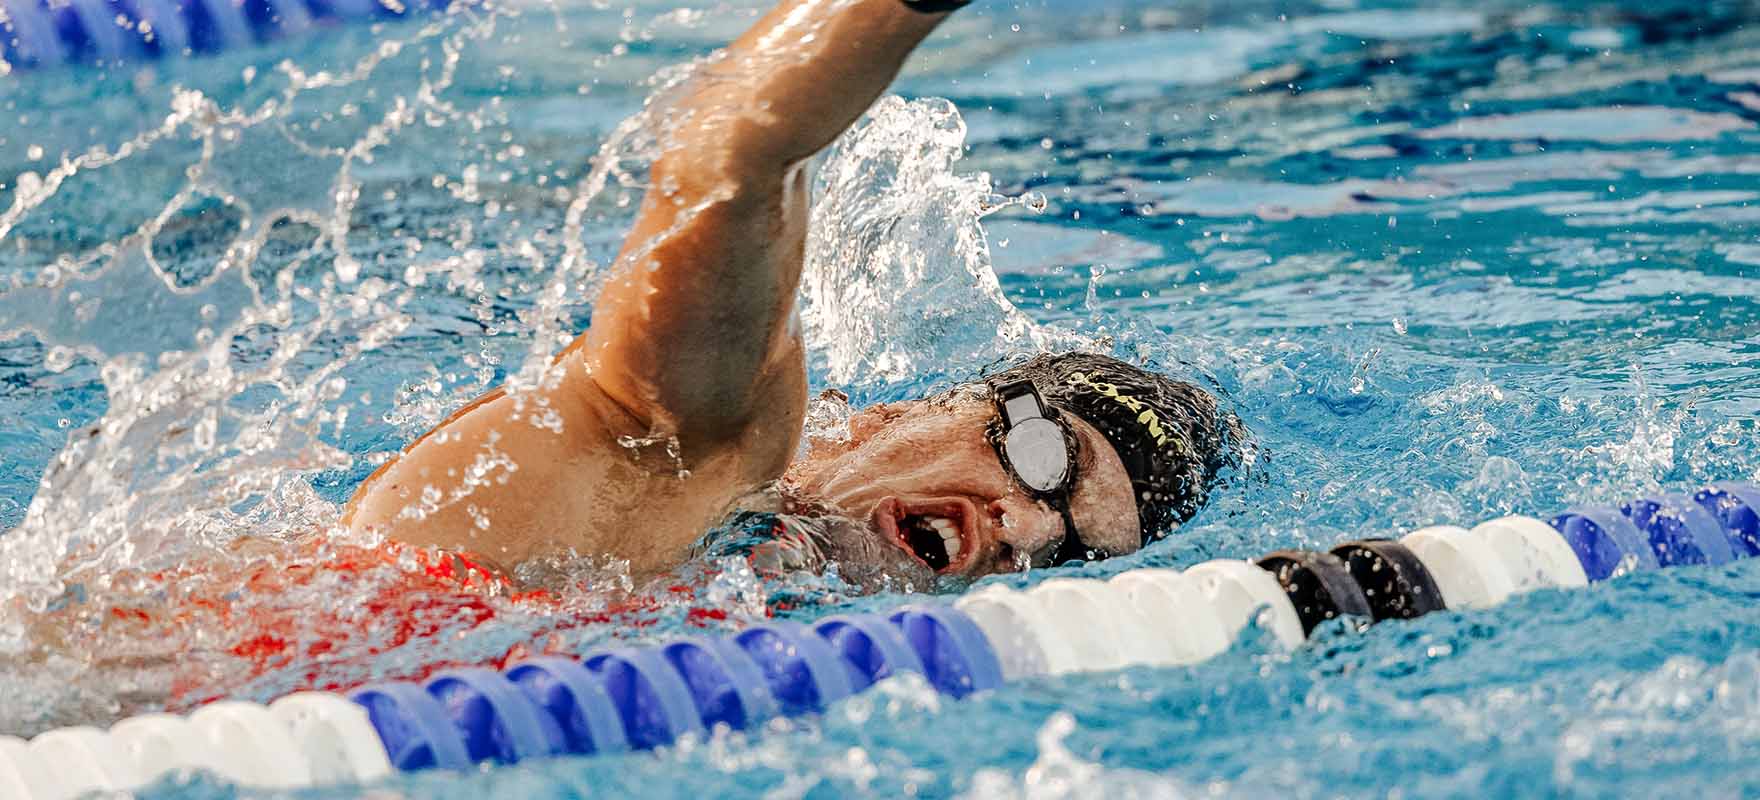 An athlete side breathing while swimming in the pool